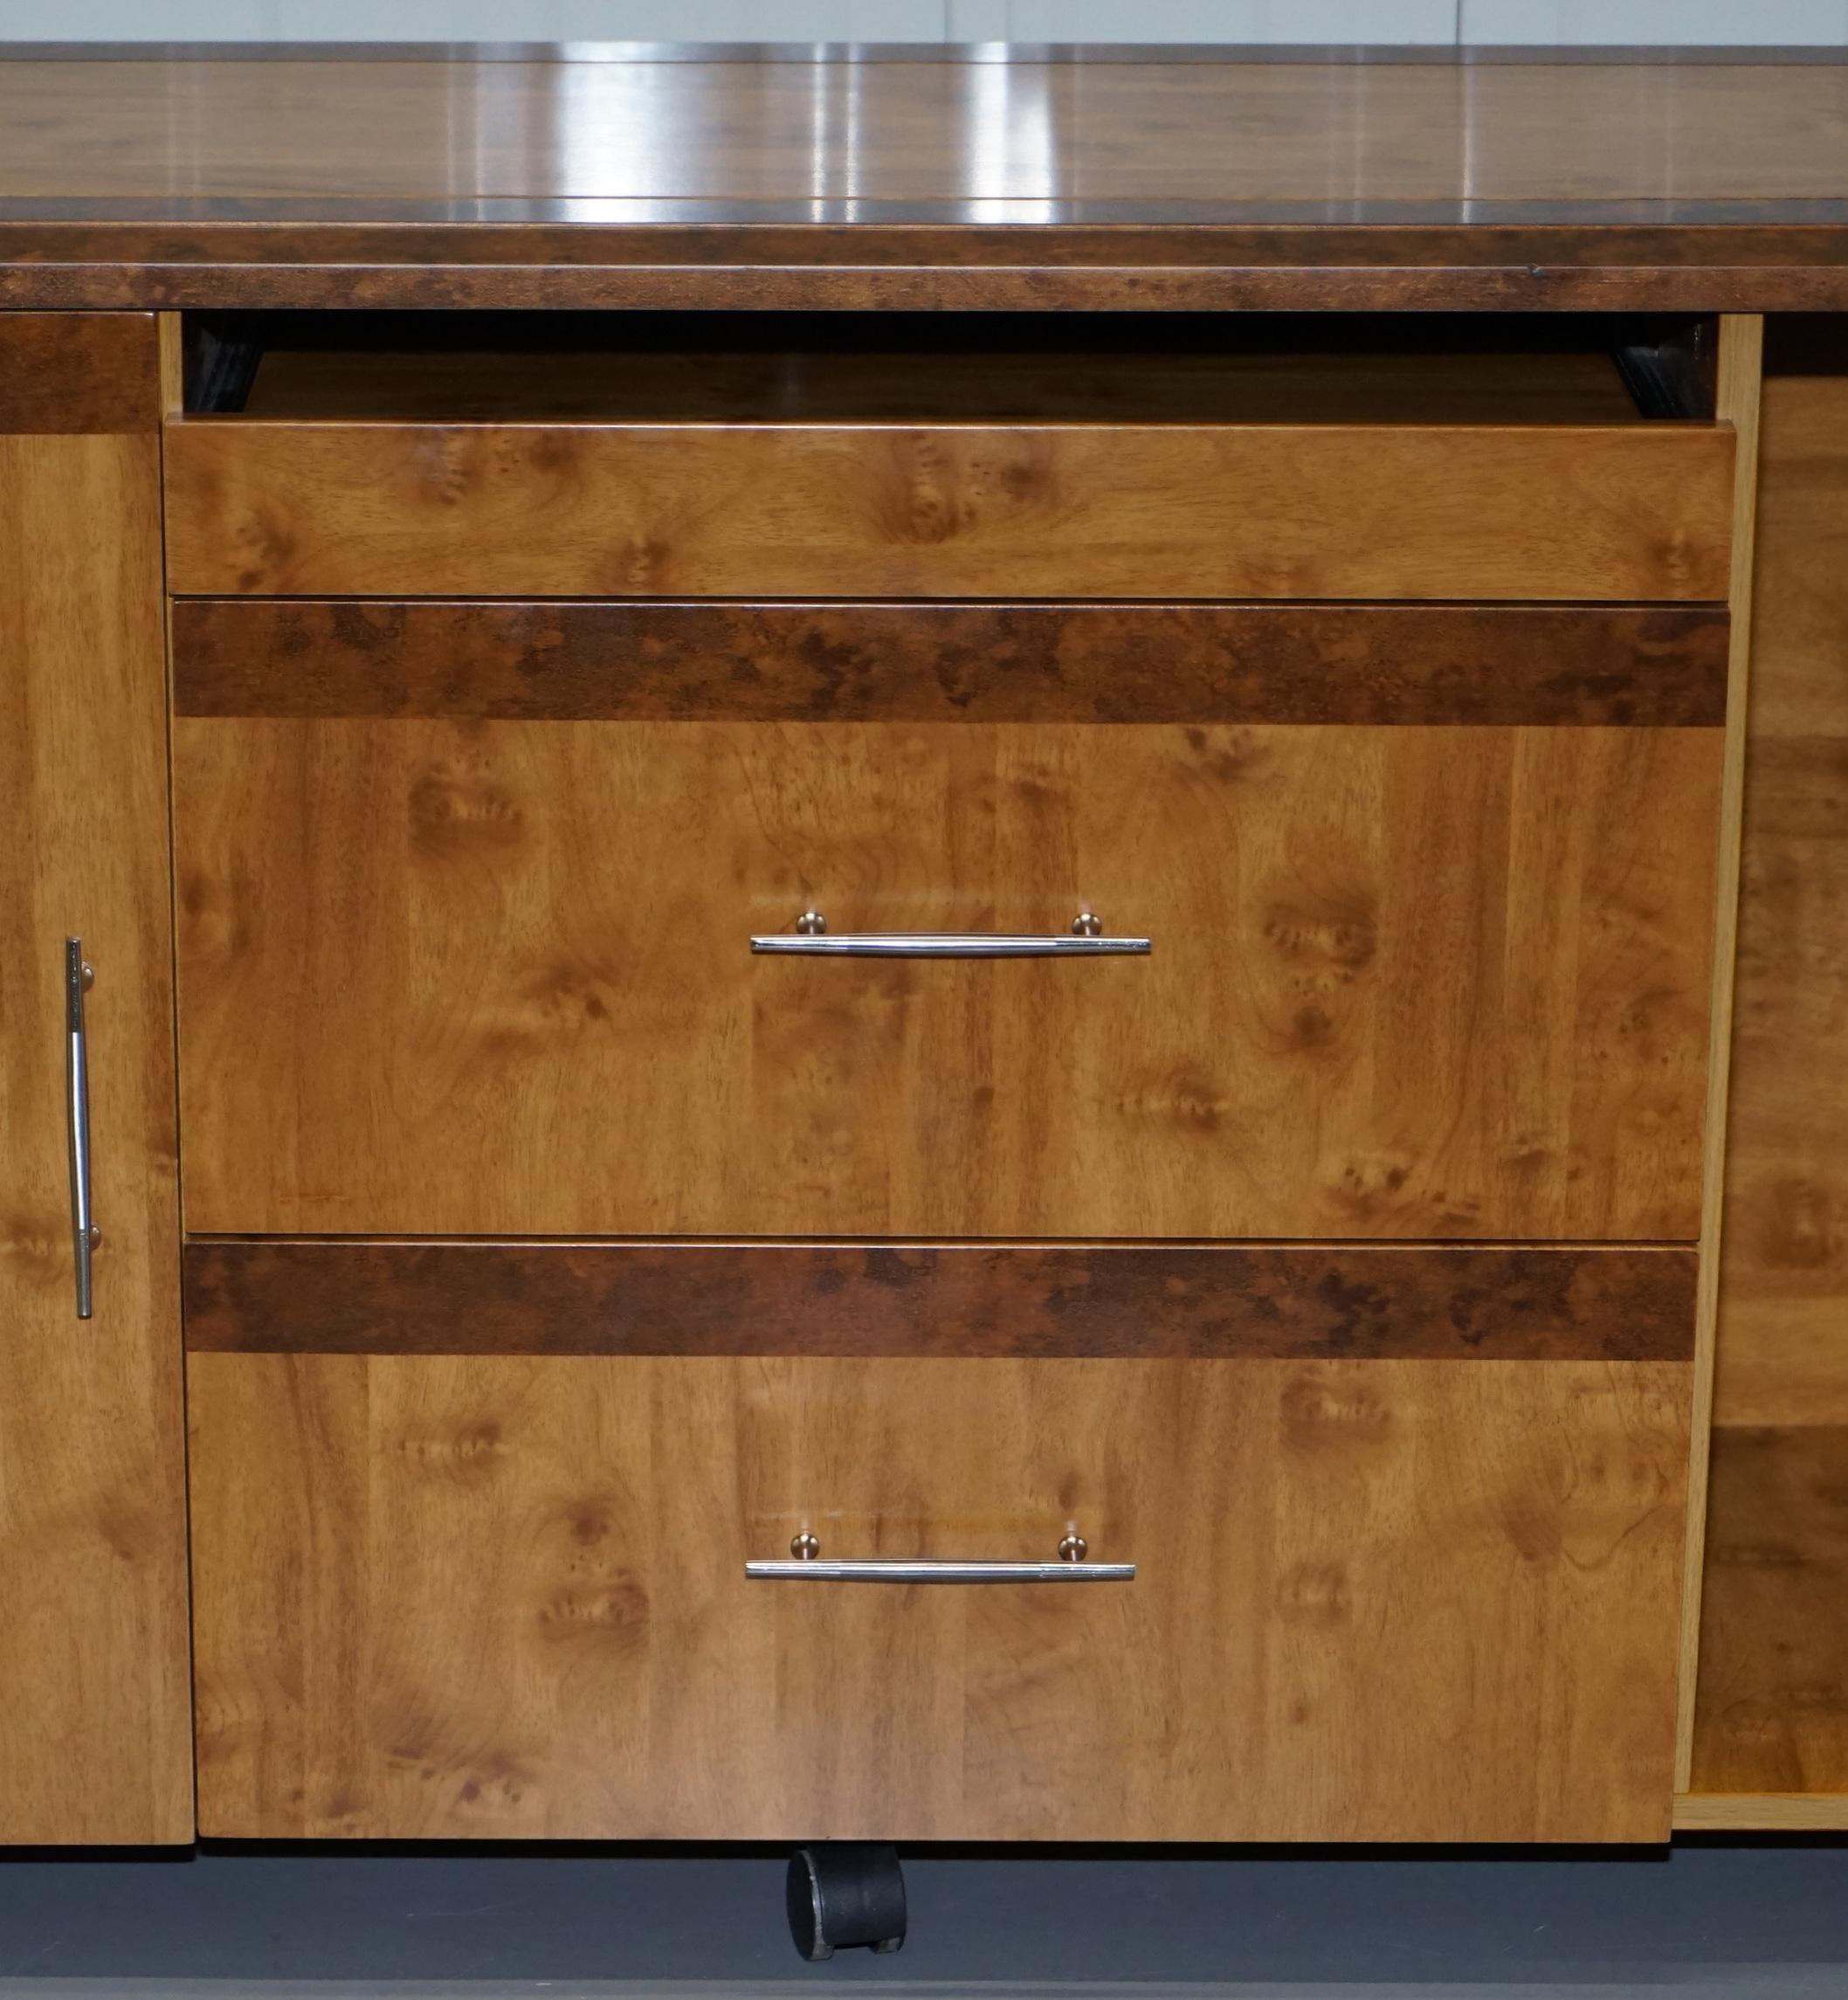 Burr Walnut Sideboard TV Stand Drawers Designed to House Computer Part of Suite For Sale 18